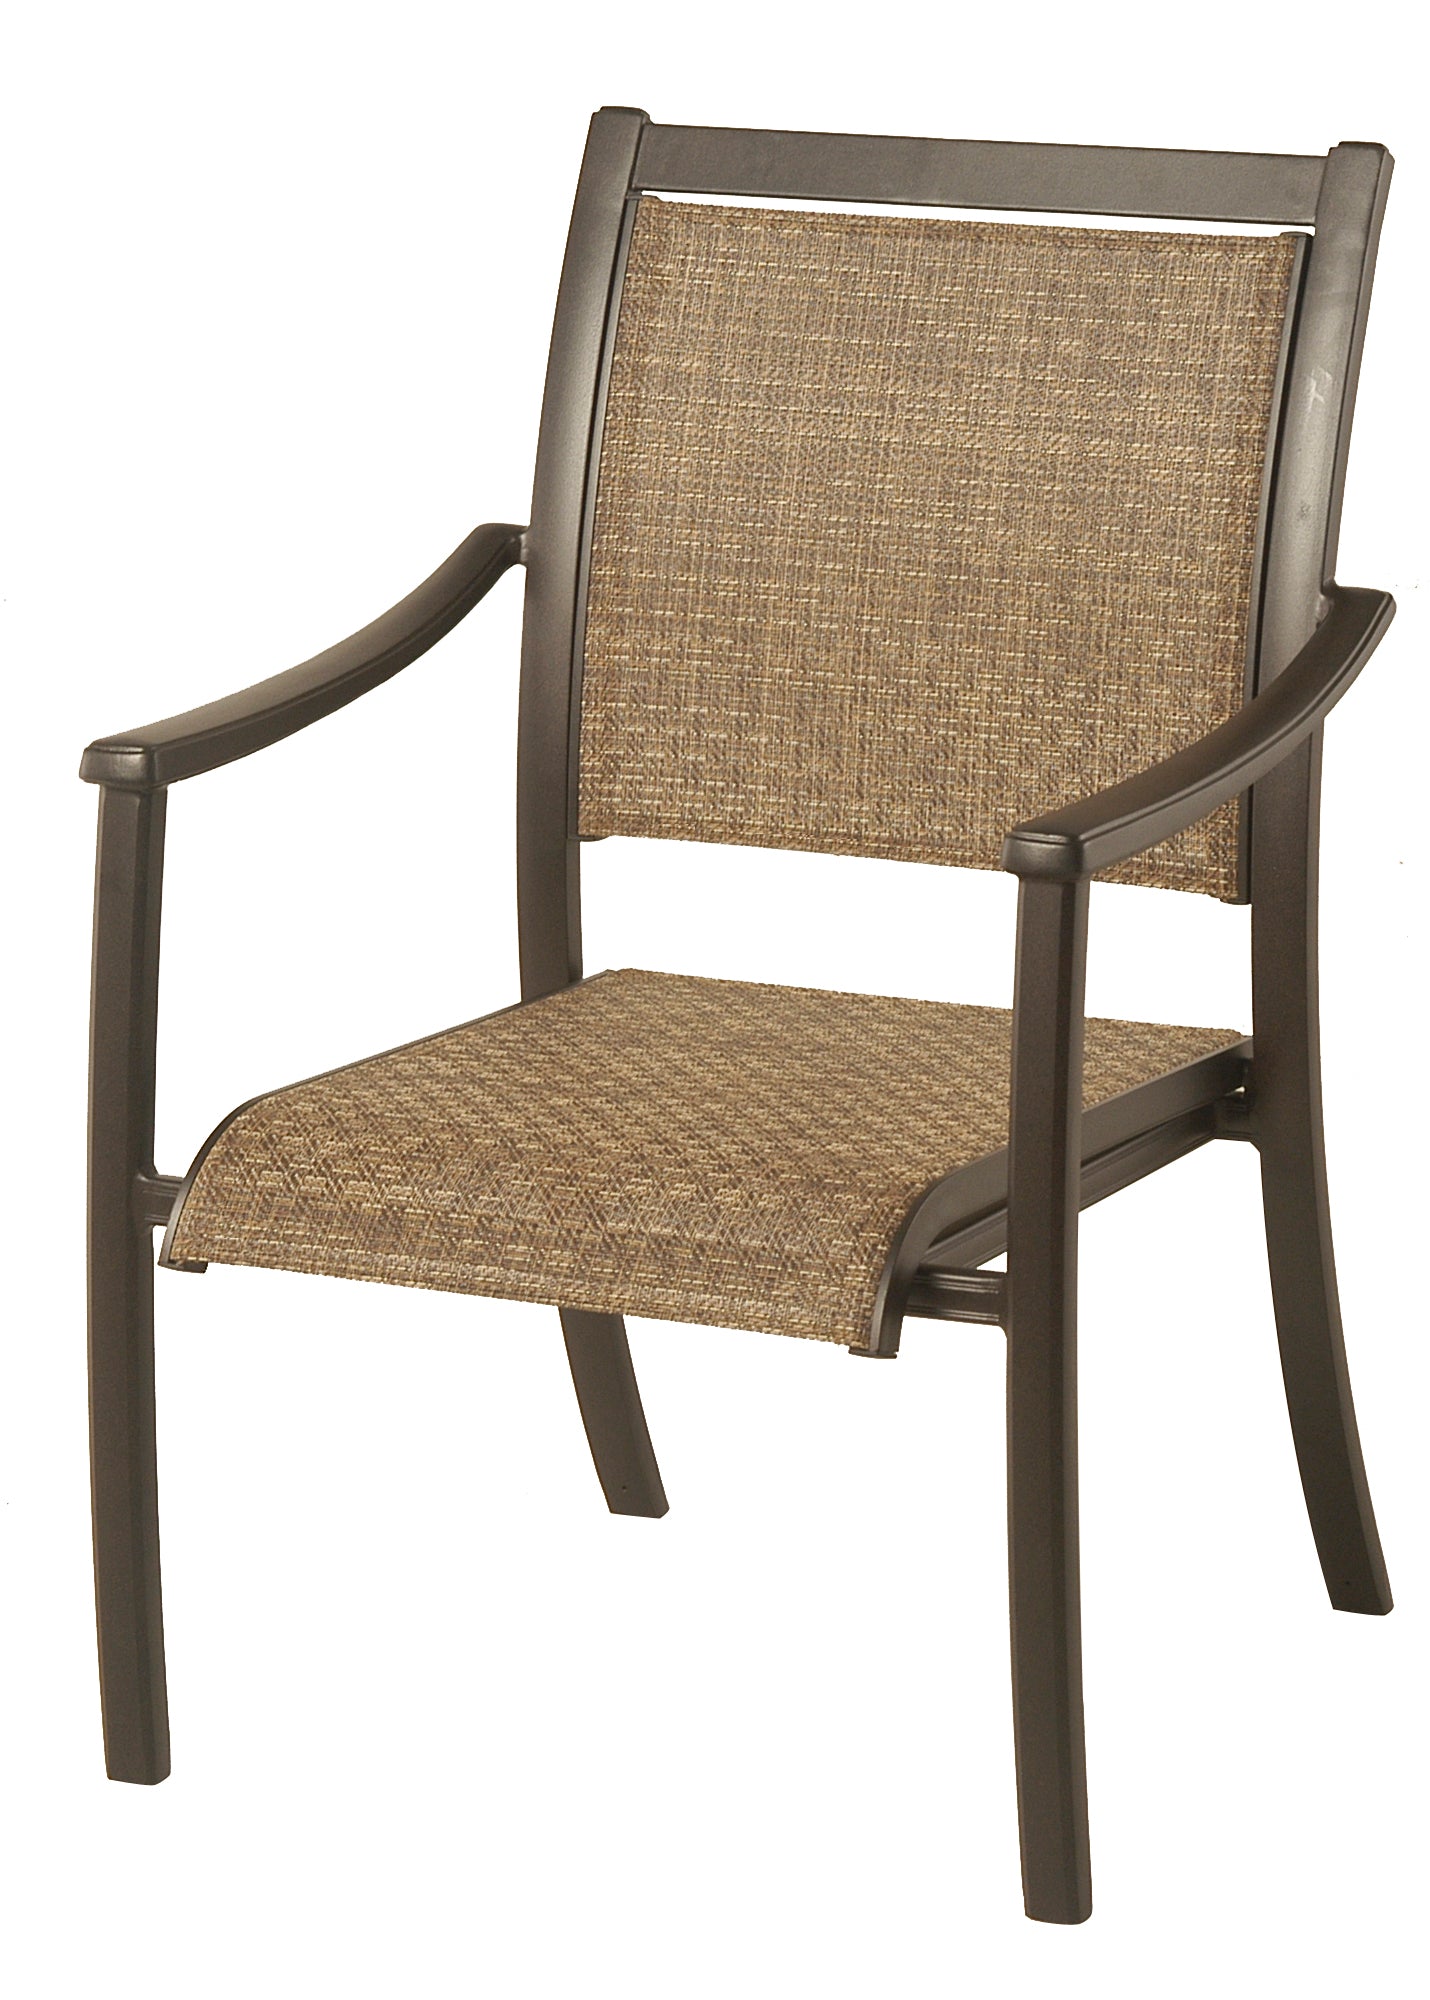 Stratford Sling Dining Chair by Hanamint